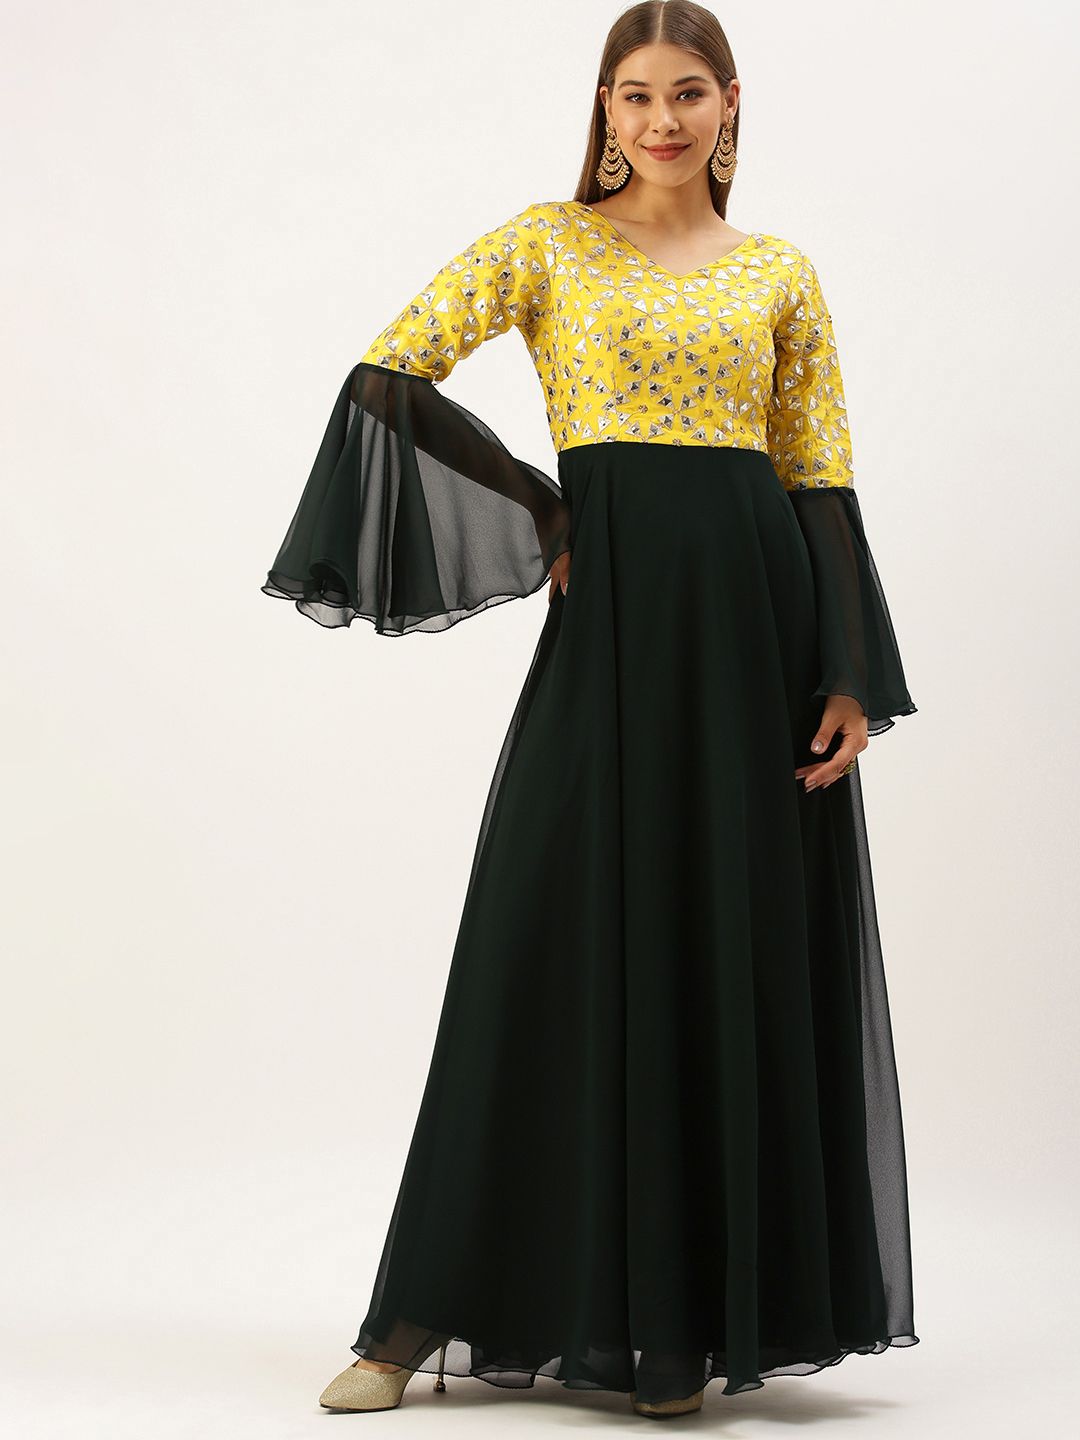 EthnoVogue Women Green & Yellow Embroidered Ethnic Maxi Dress Price in India